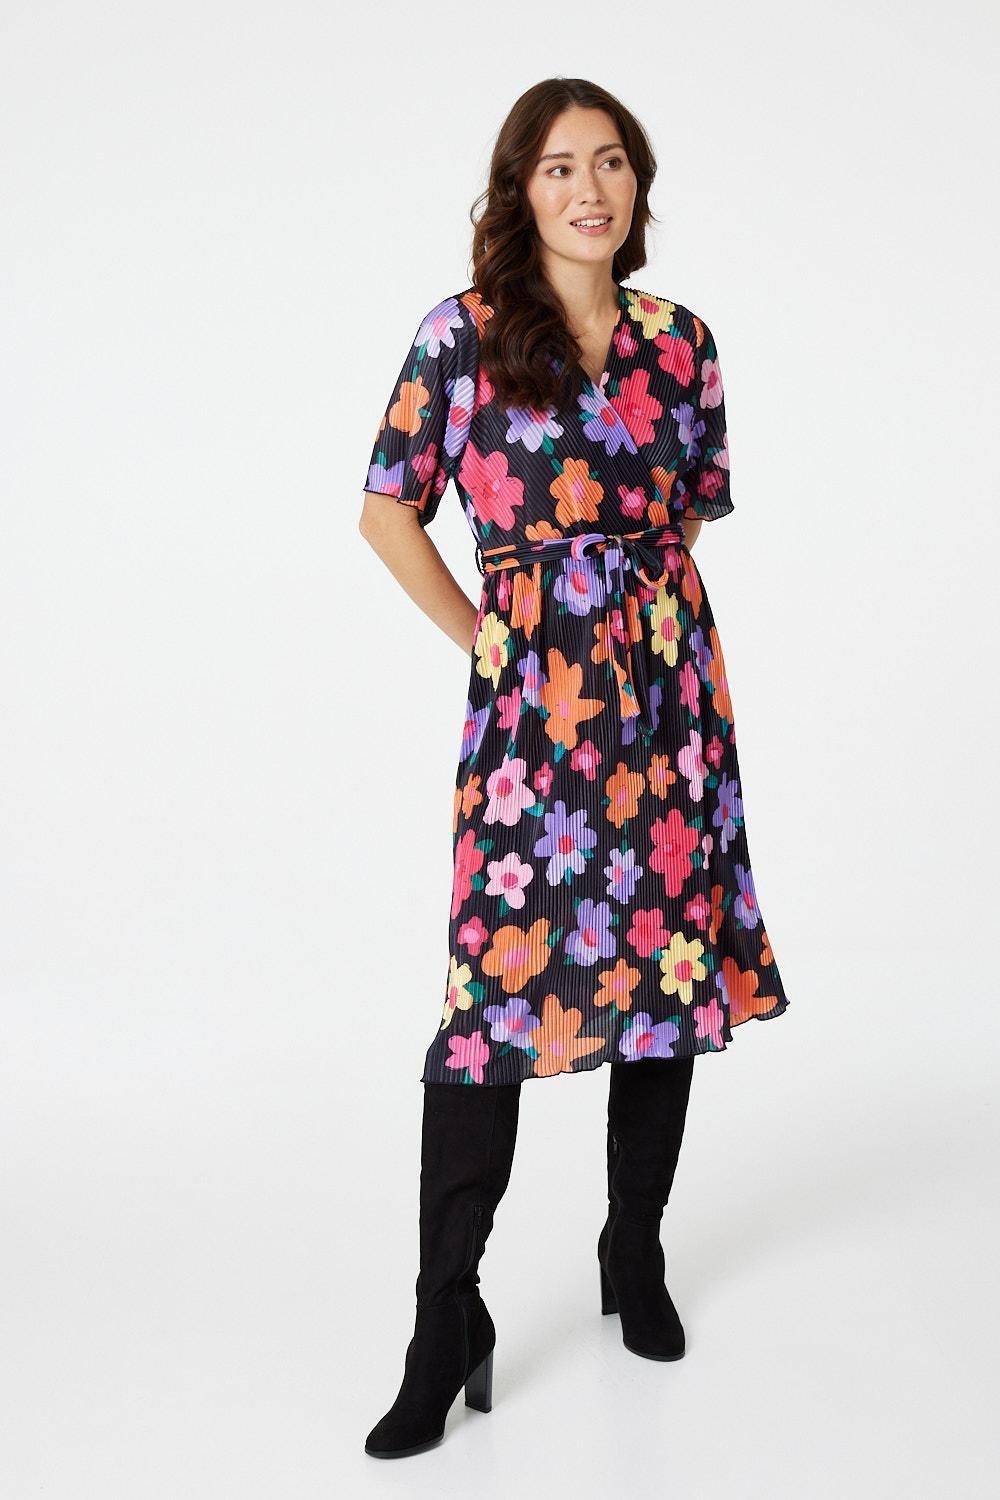 Floral Long Sleeve Pleated Dress